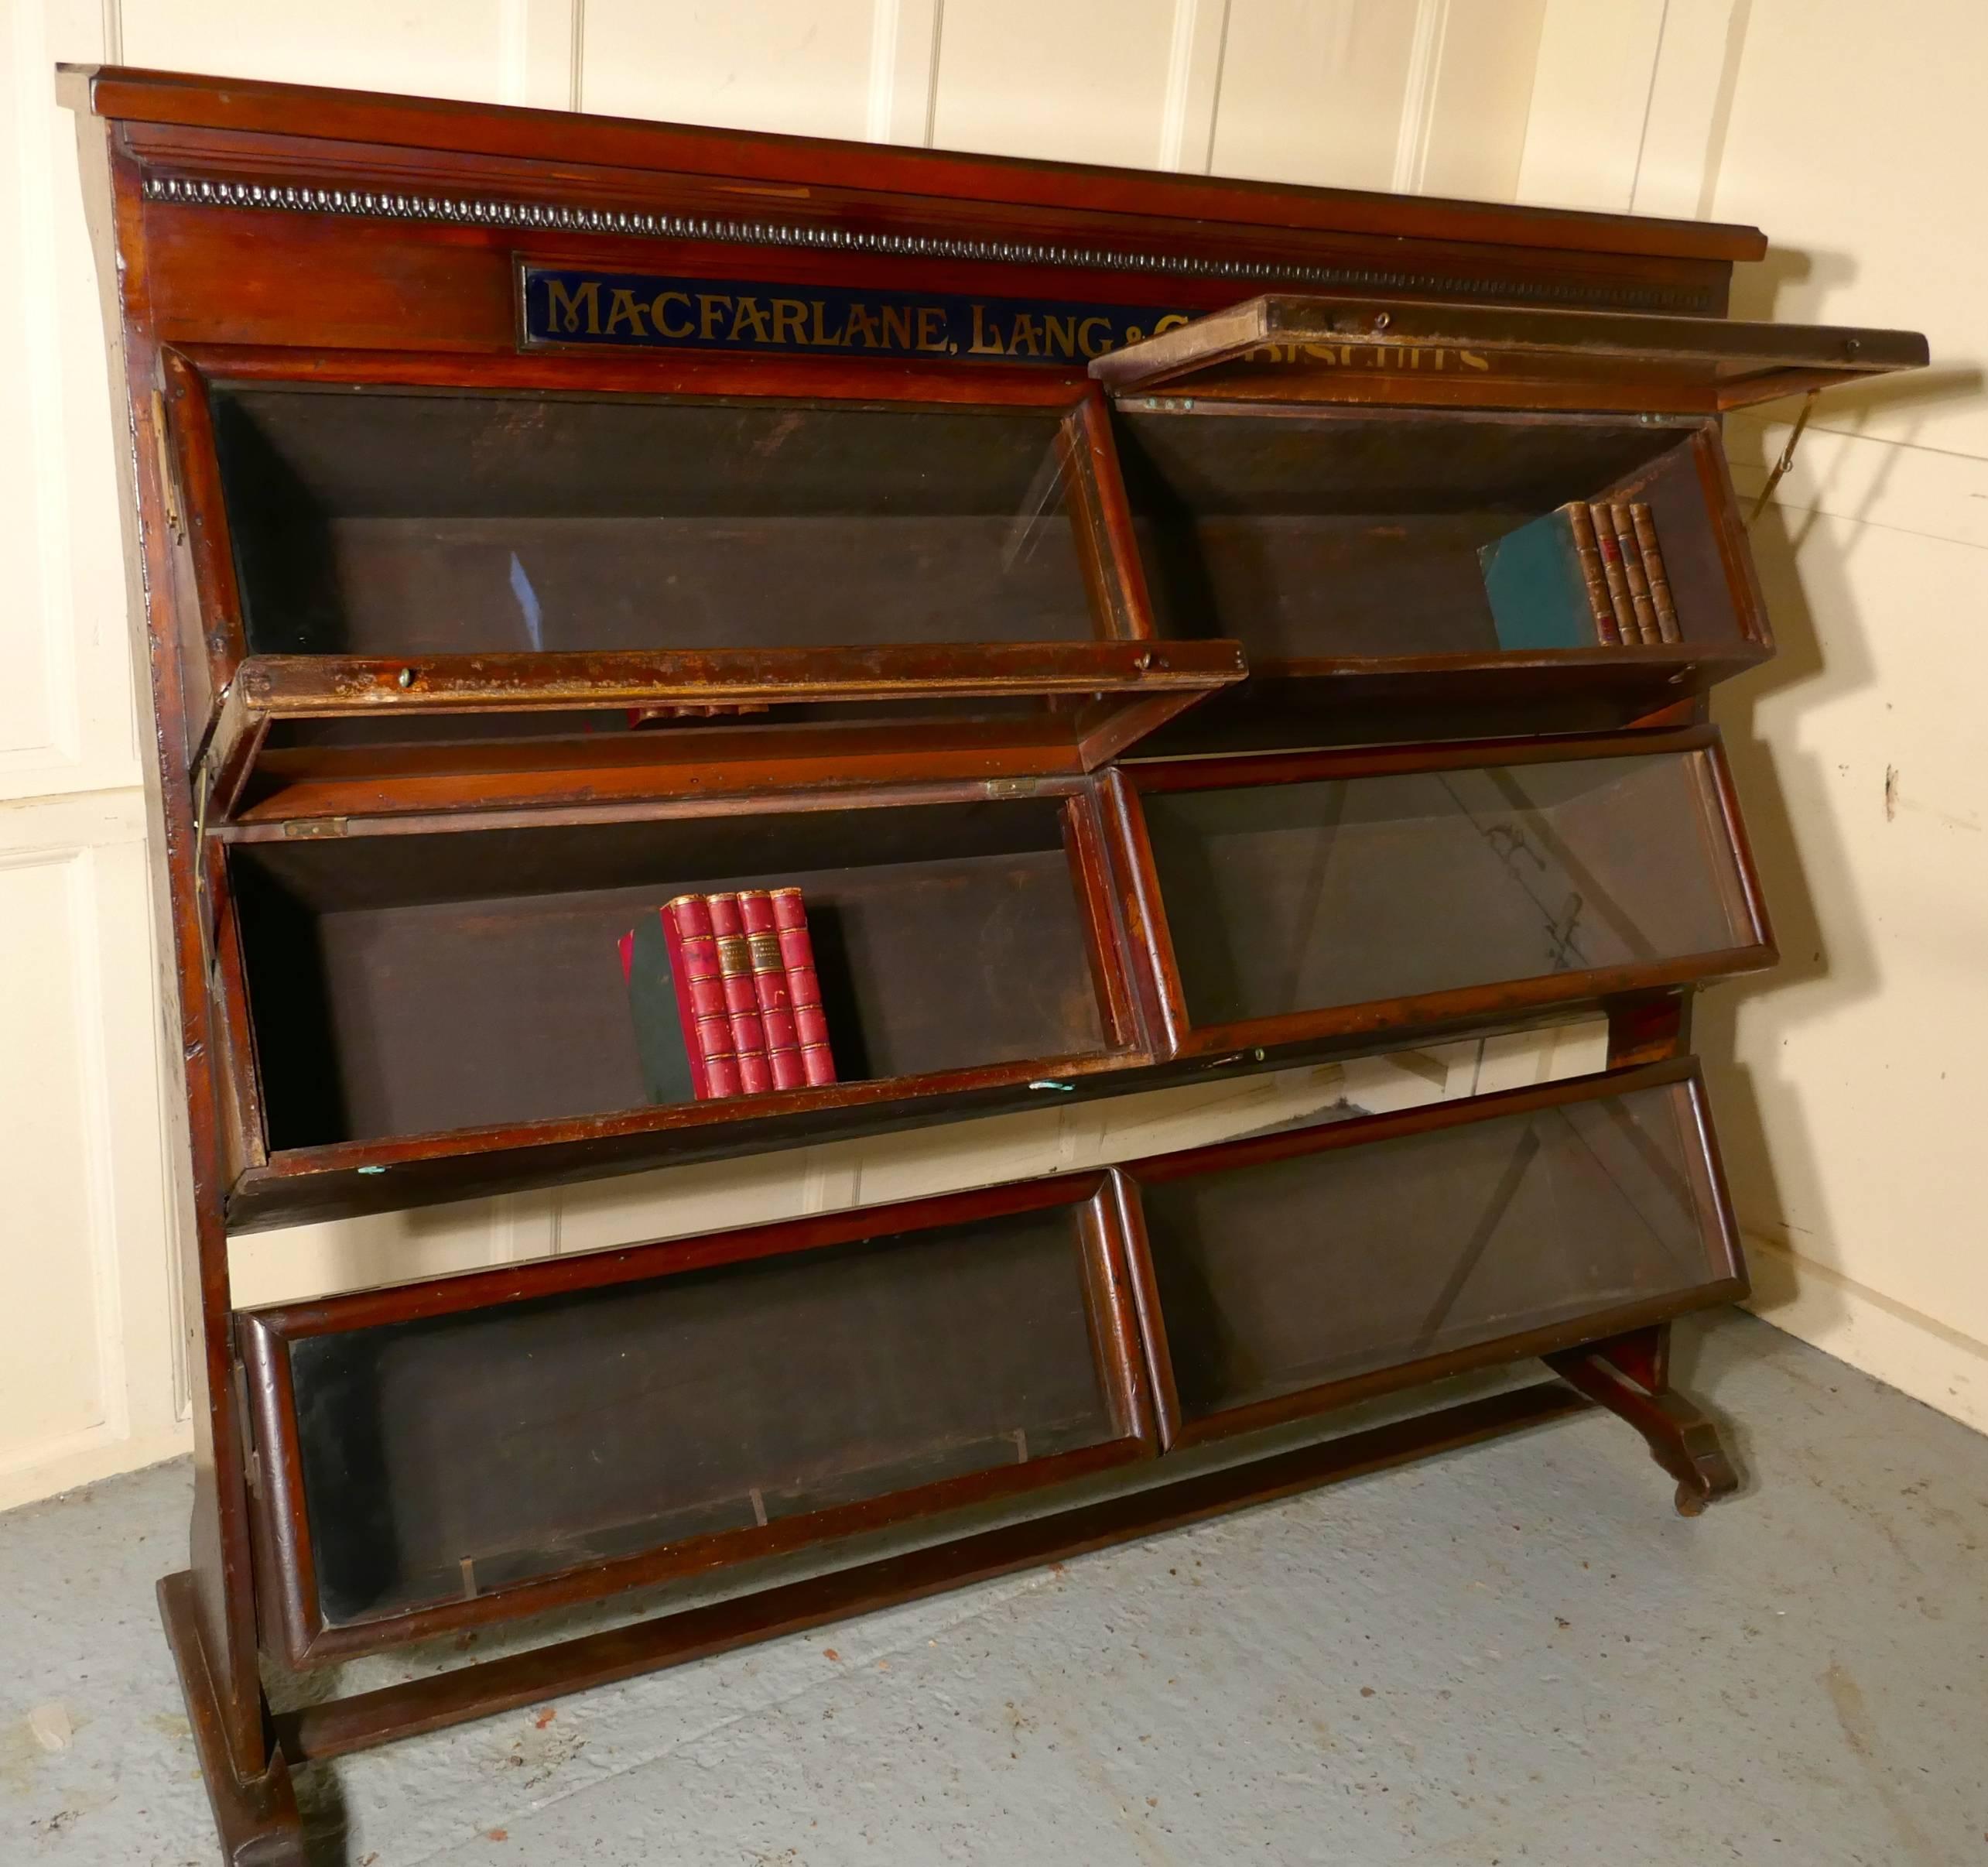 20ième siècle MacFarlane. Lang and Co's Biscuits Shop Display Cabinet 